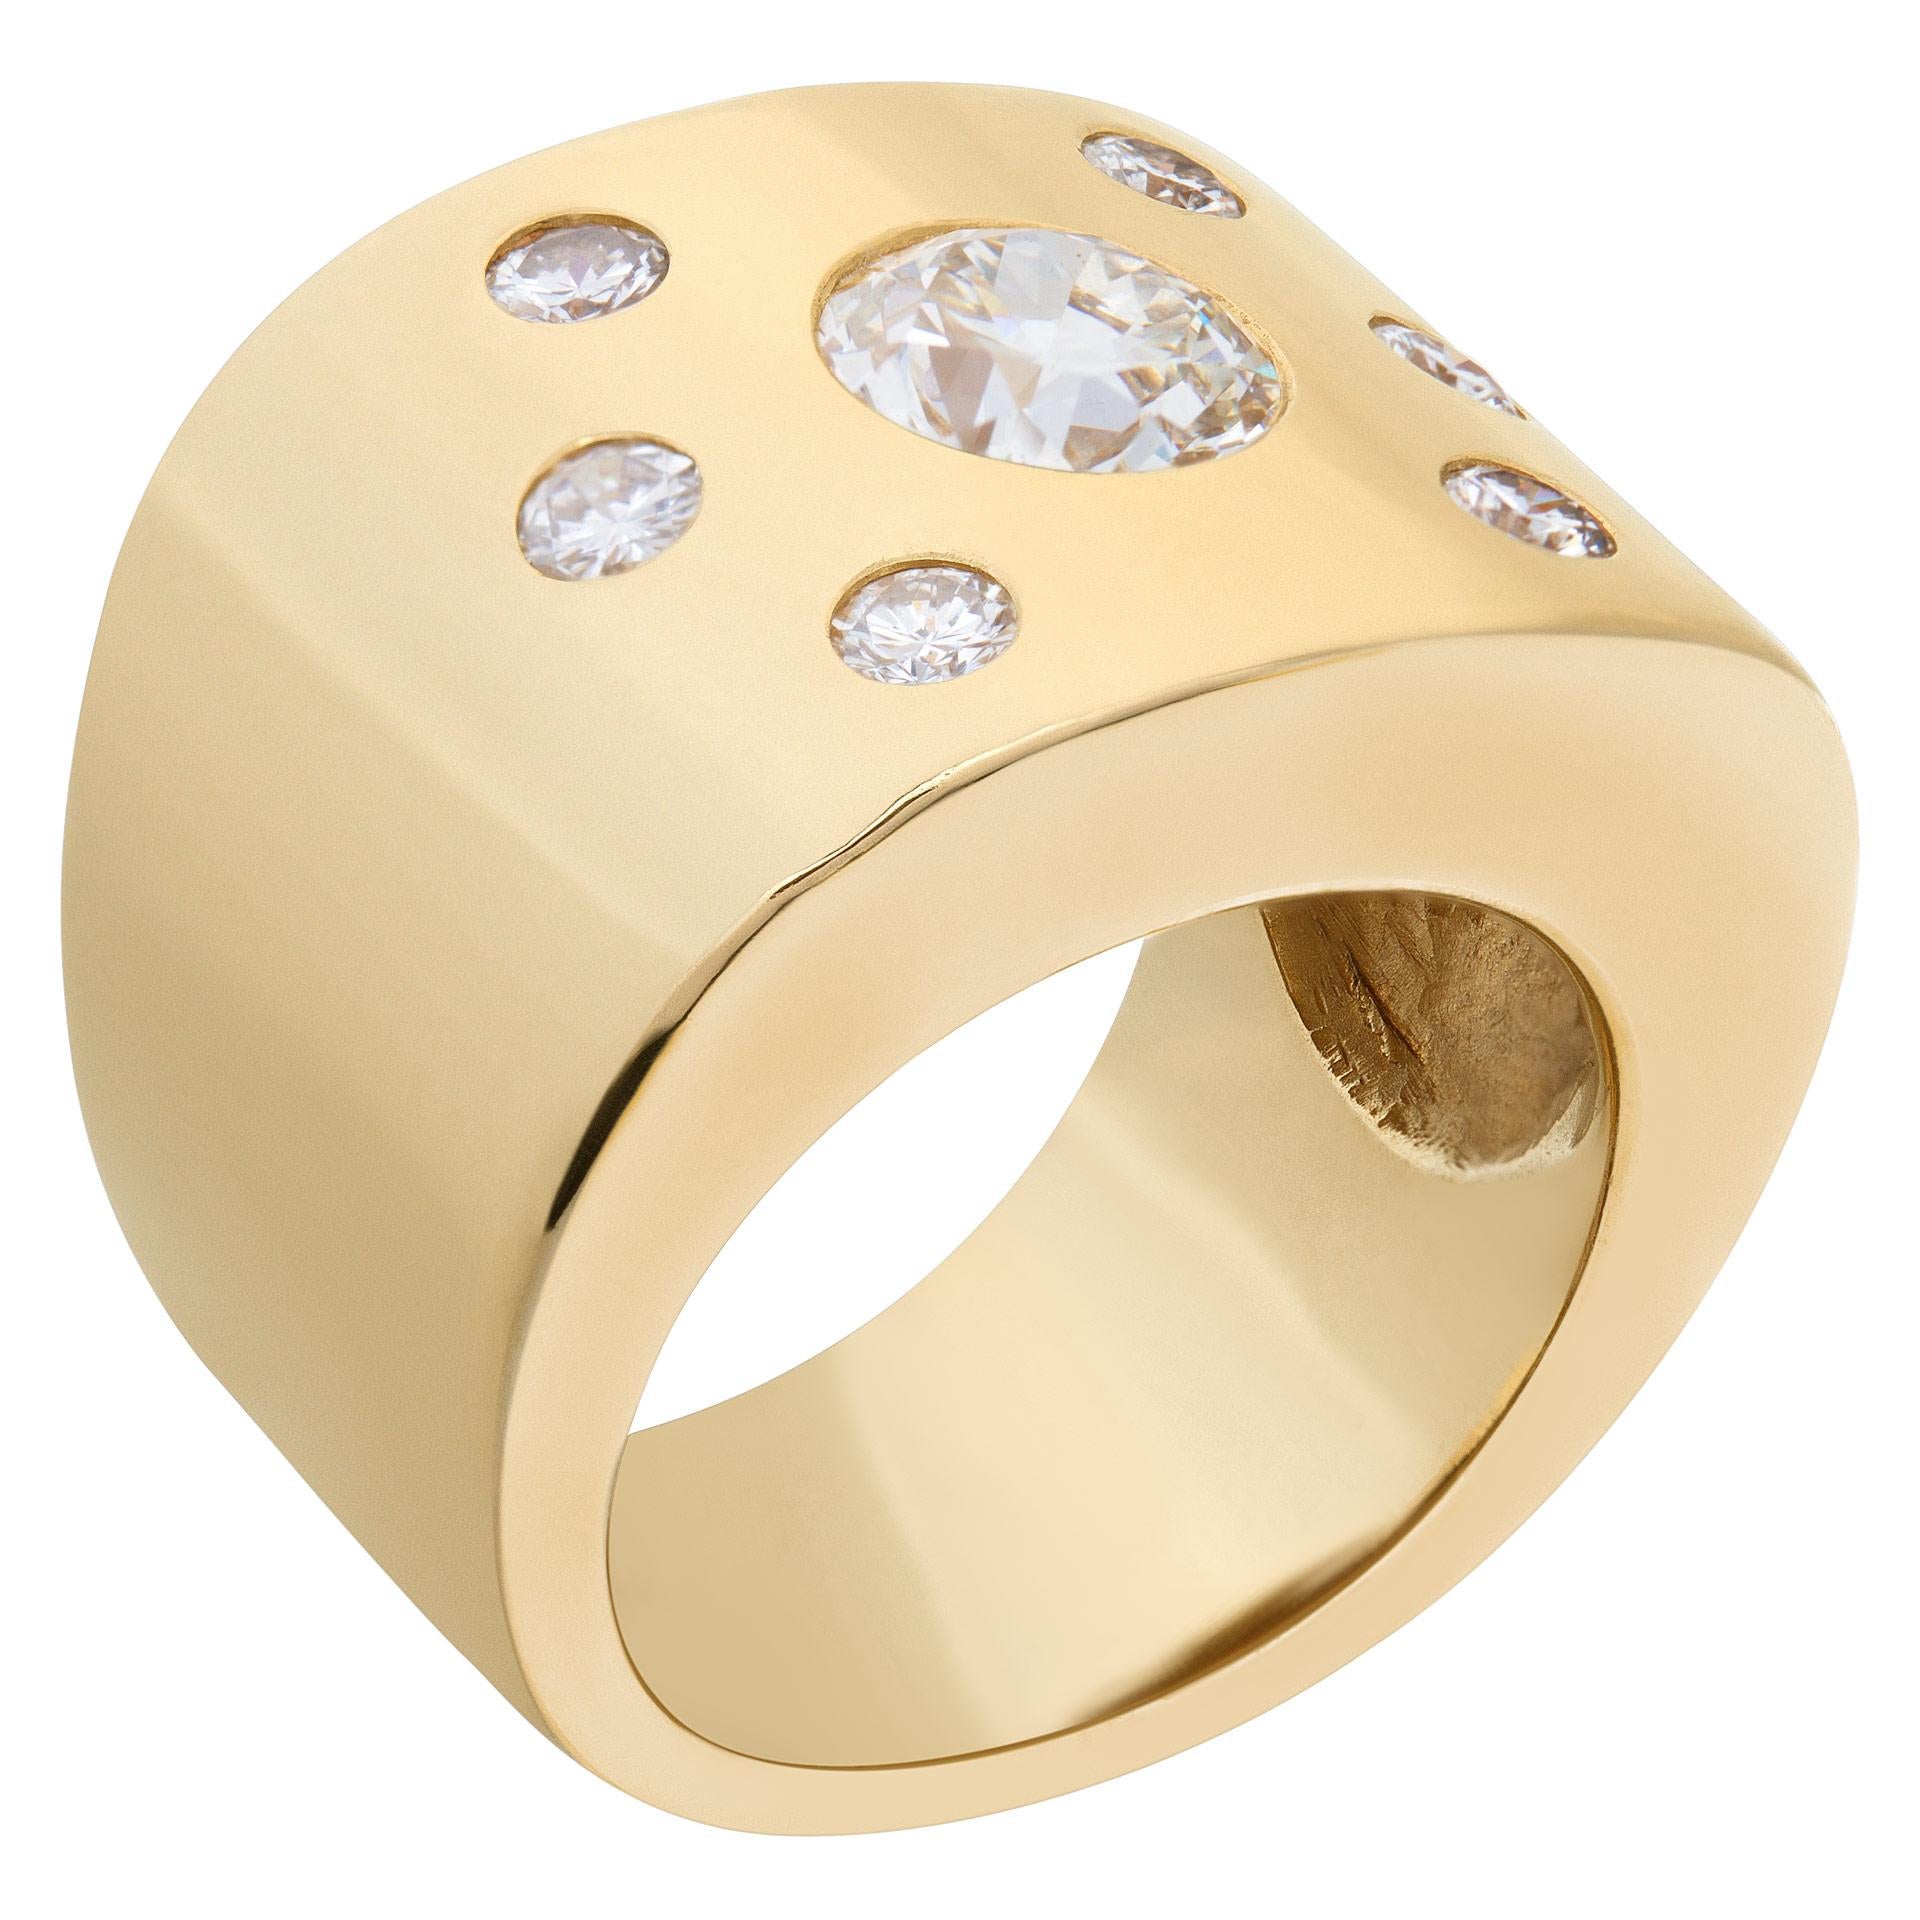 Impressive & wide diamond ring in 14k yellow gold. Center European cut diamond approximately 1 carat (J color, VS2 clarity) with 0.42 carats in side bezel set diamonds. Size 5.5. Width tempers from 16.3mm to 9.8mm. This Diamond ring is currently